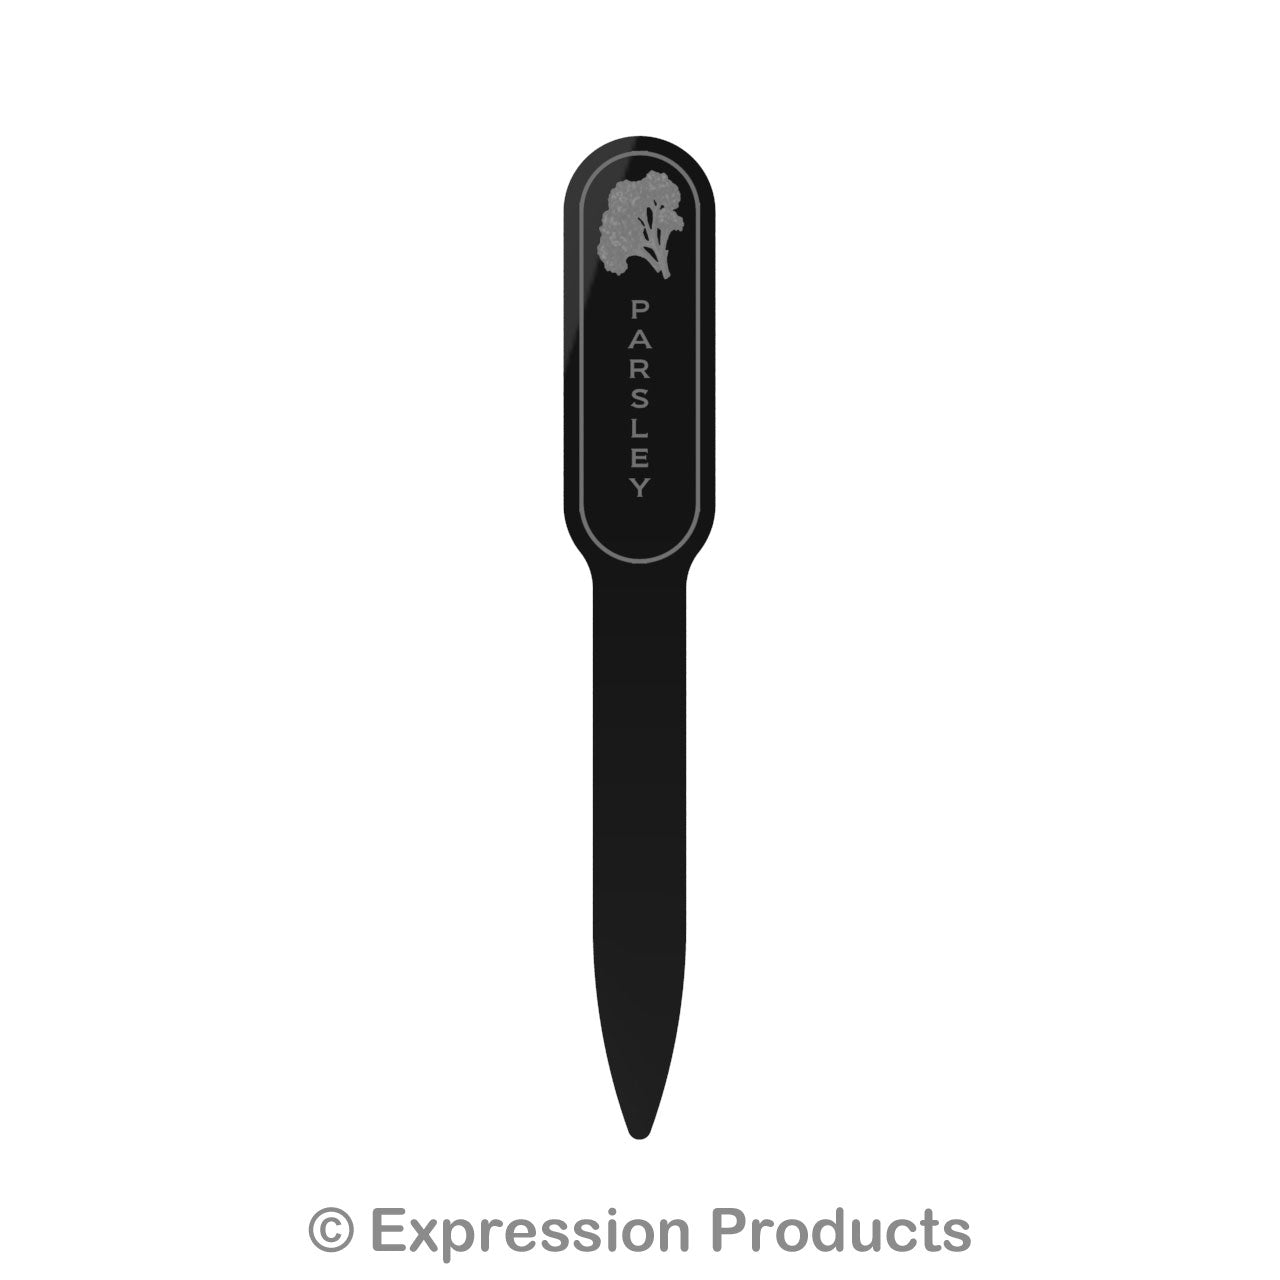 Garden Herb Marker / Label - Etched High Gloss Black Acrylic - Expression Products Ltd